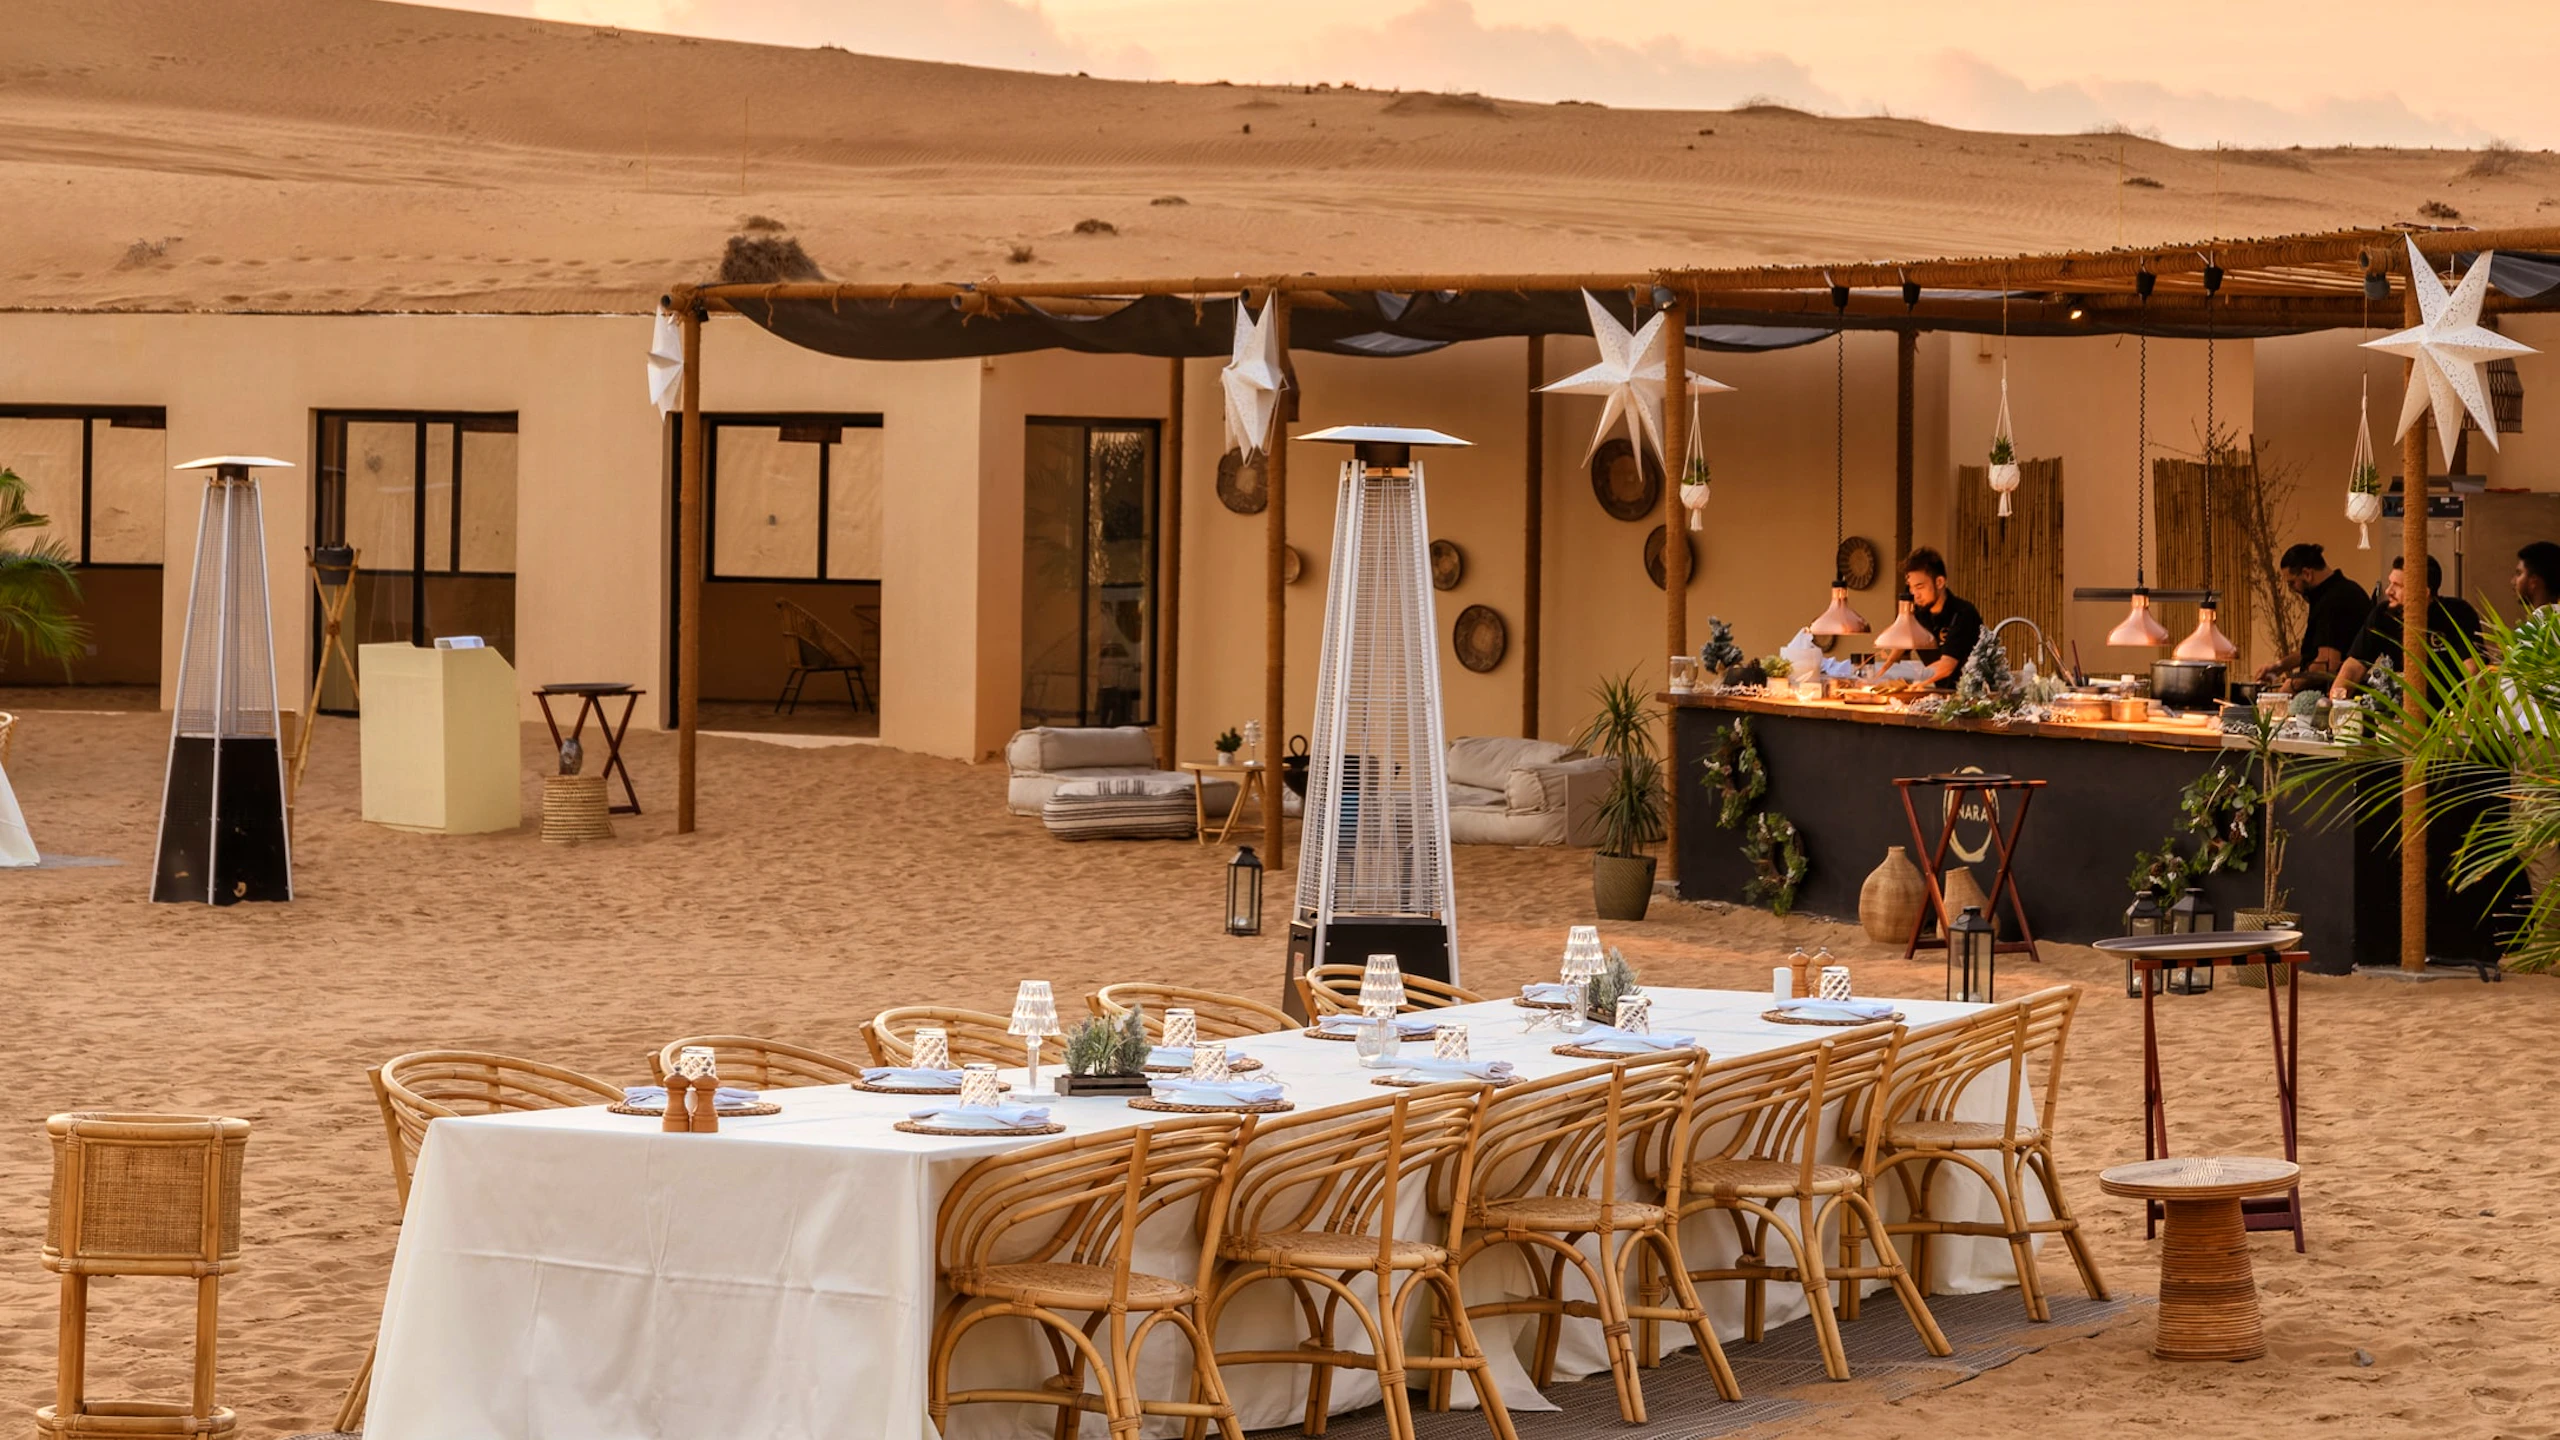 Sonara Camp: Sunset and Dinner Experience  Location